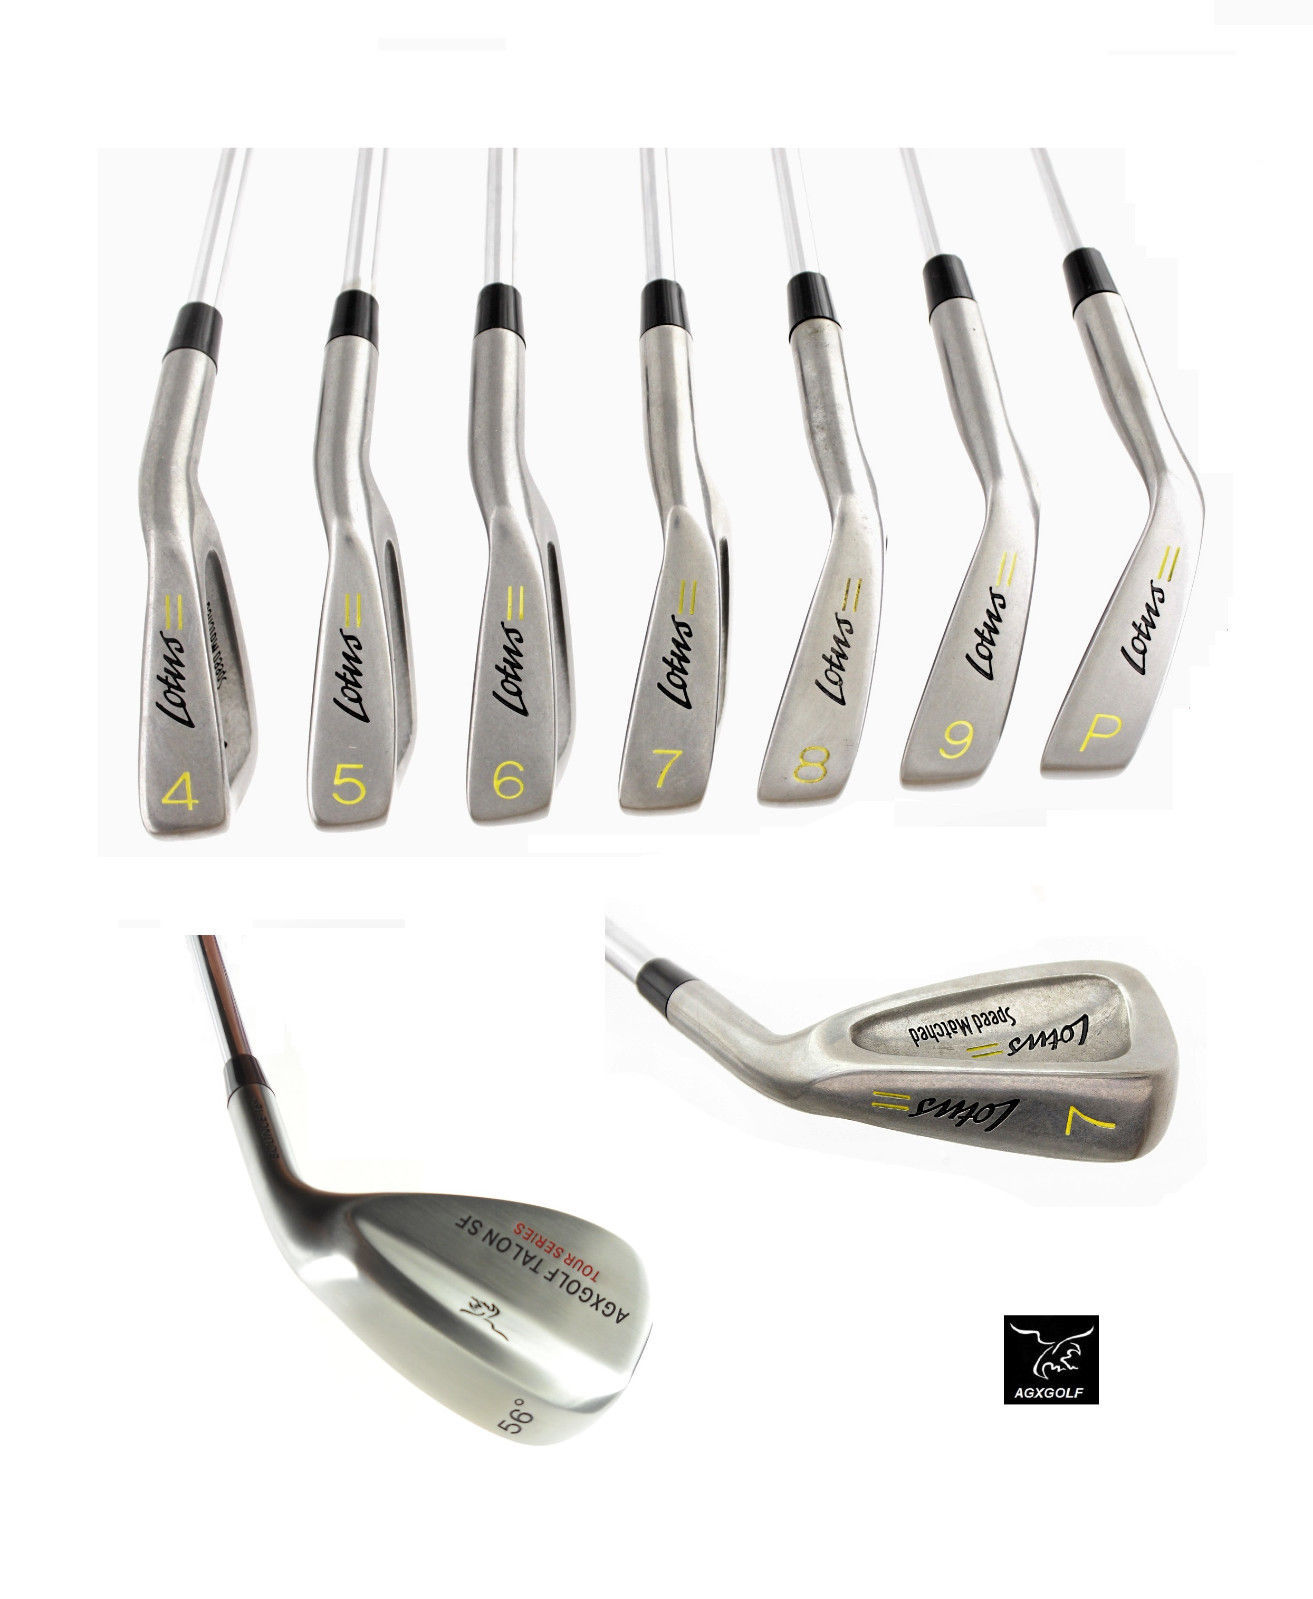 A brief history of agx golf clubs